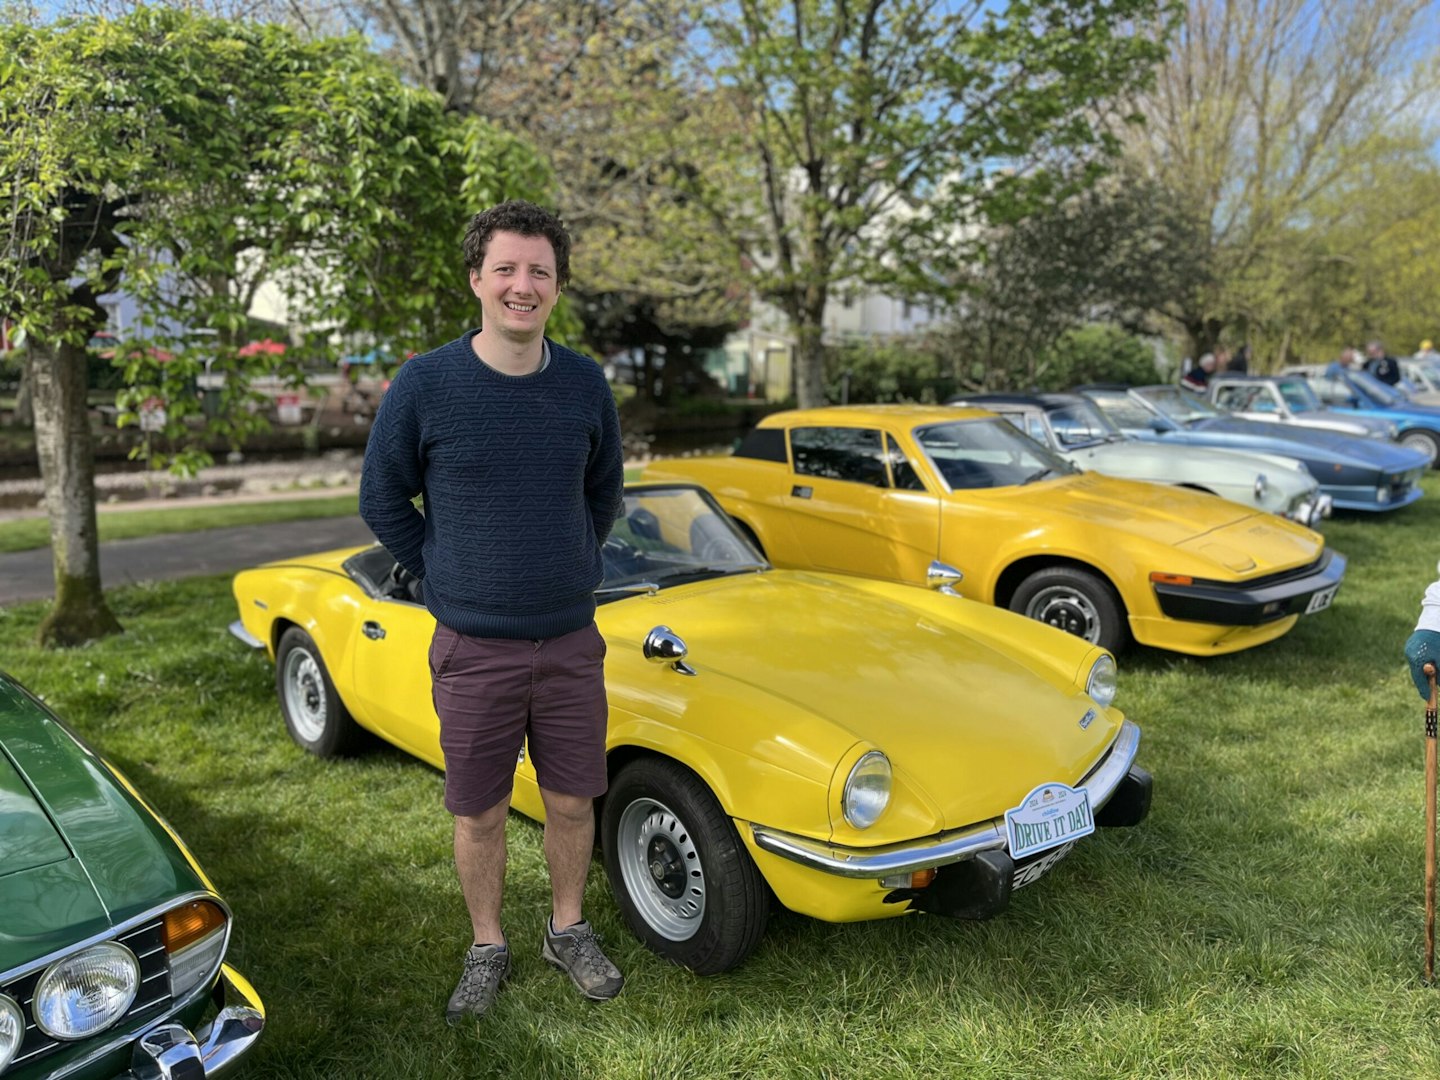 Joney Clay comes from a family of Triumph lovers and has carried out a great deal of restoration work on his 1973 Triumph Spitfire himself.